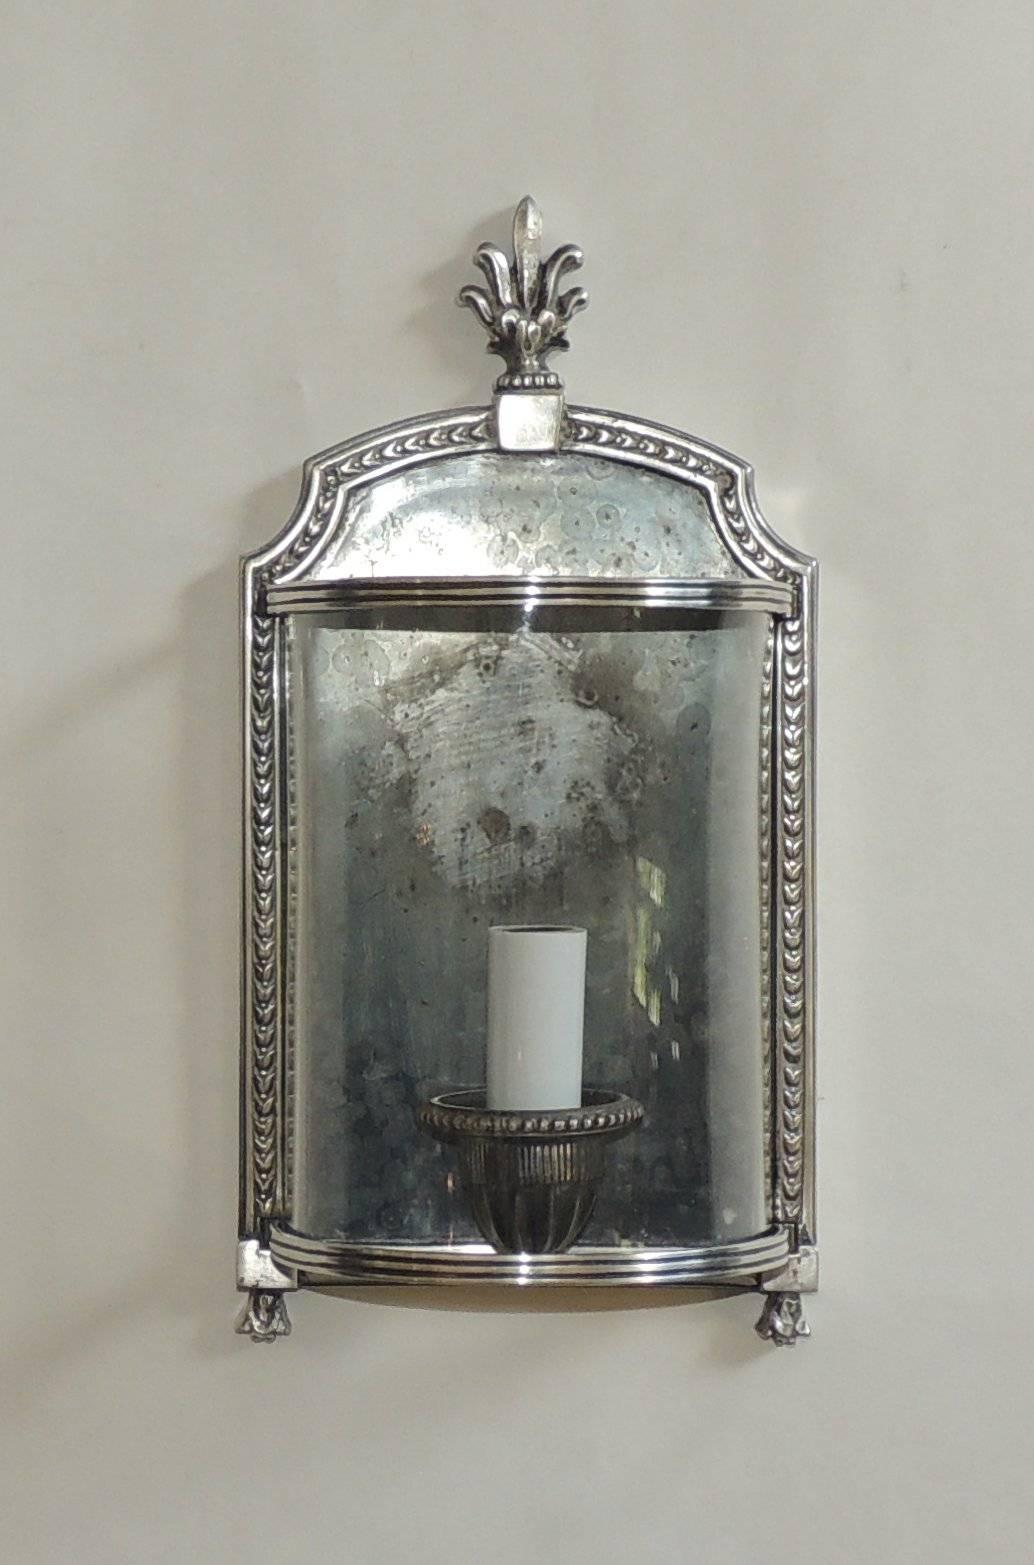 Wonderful pair of silvered bronze nickel antique plated curved glass 
E.F. Caldwell wall sconce light fixtures in the regency / neoclassical style.